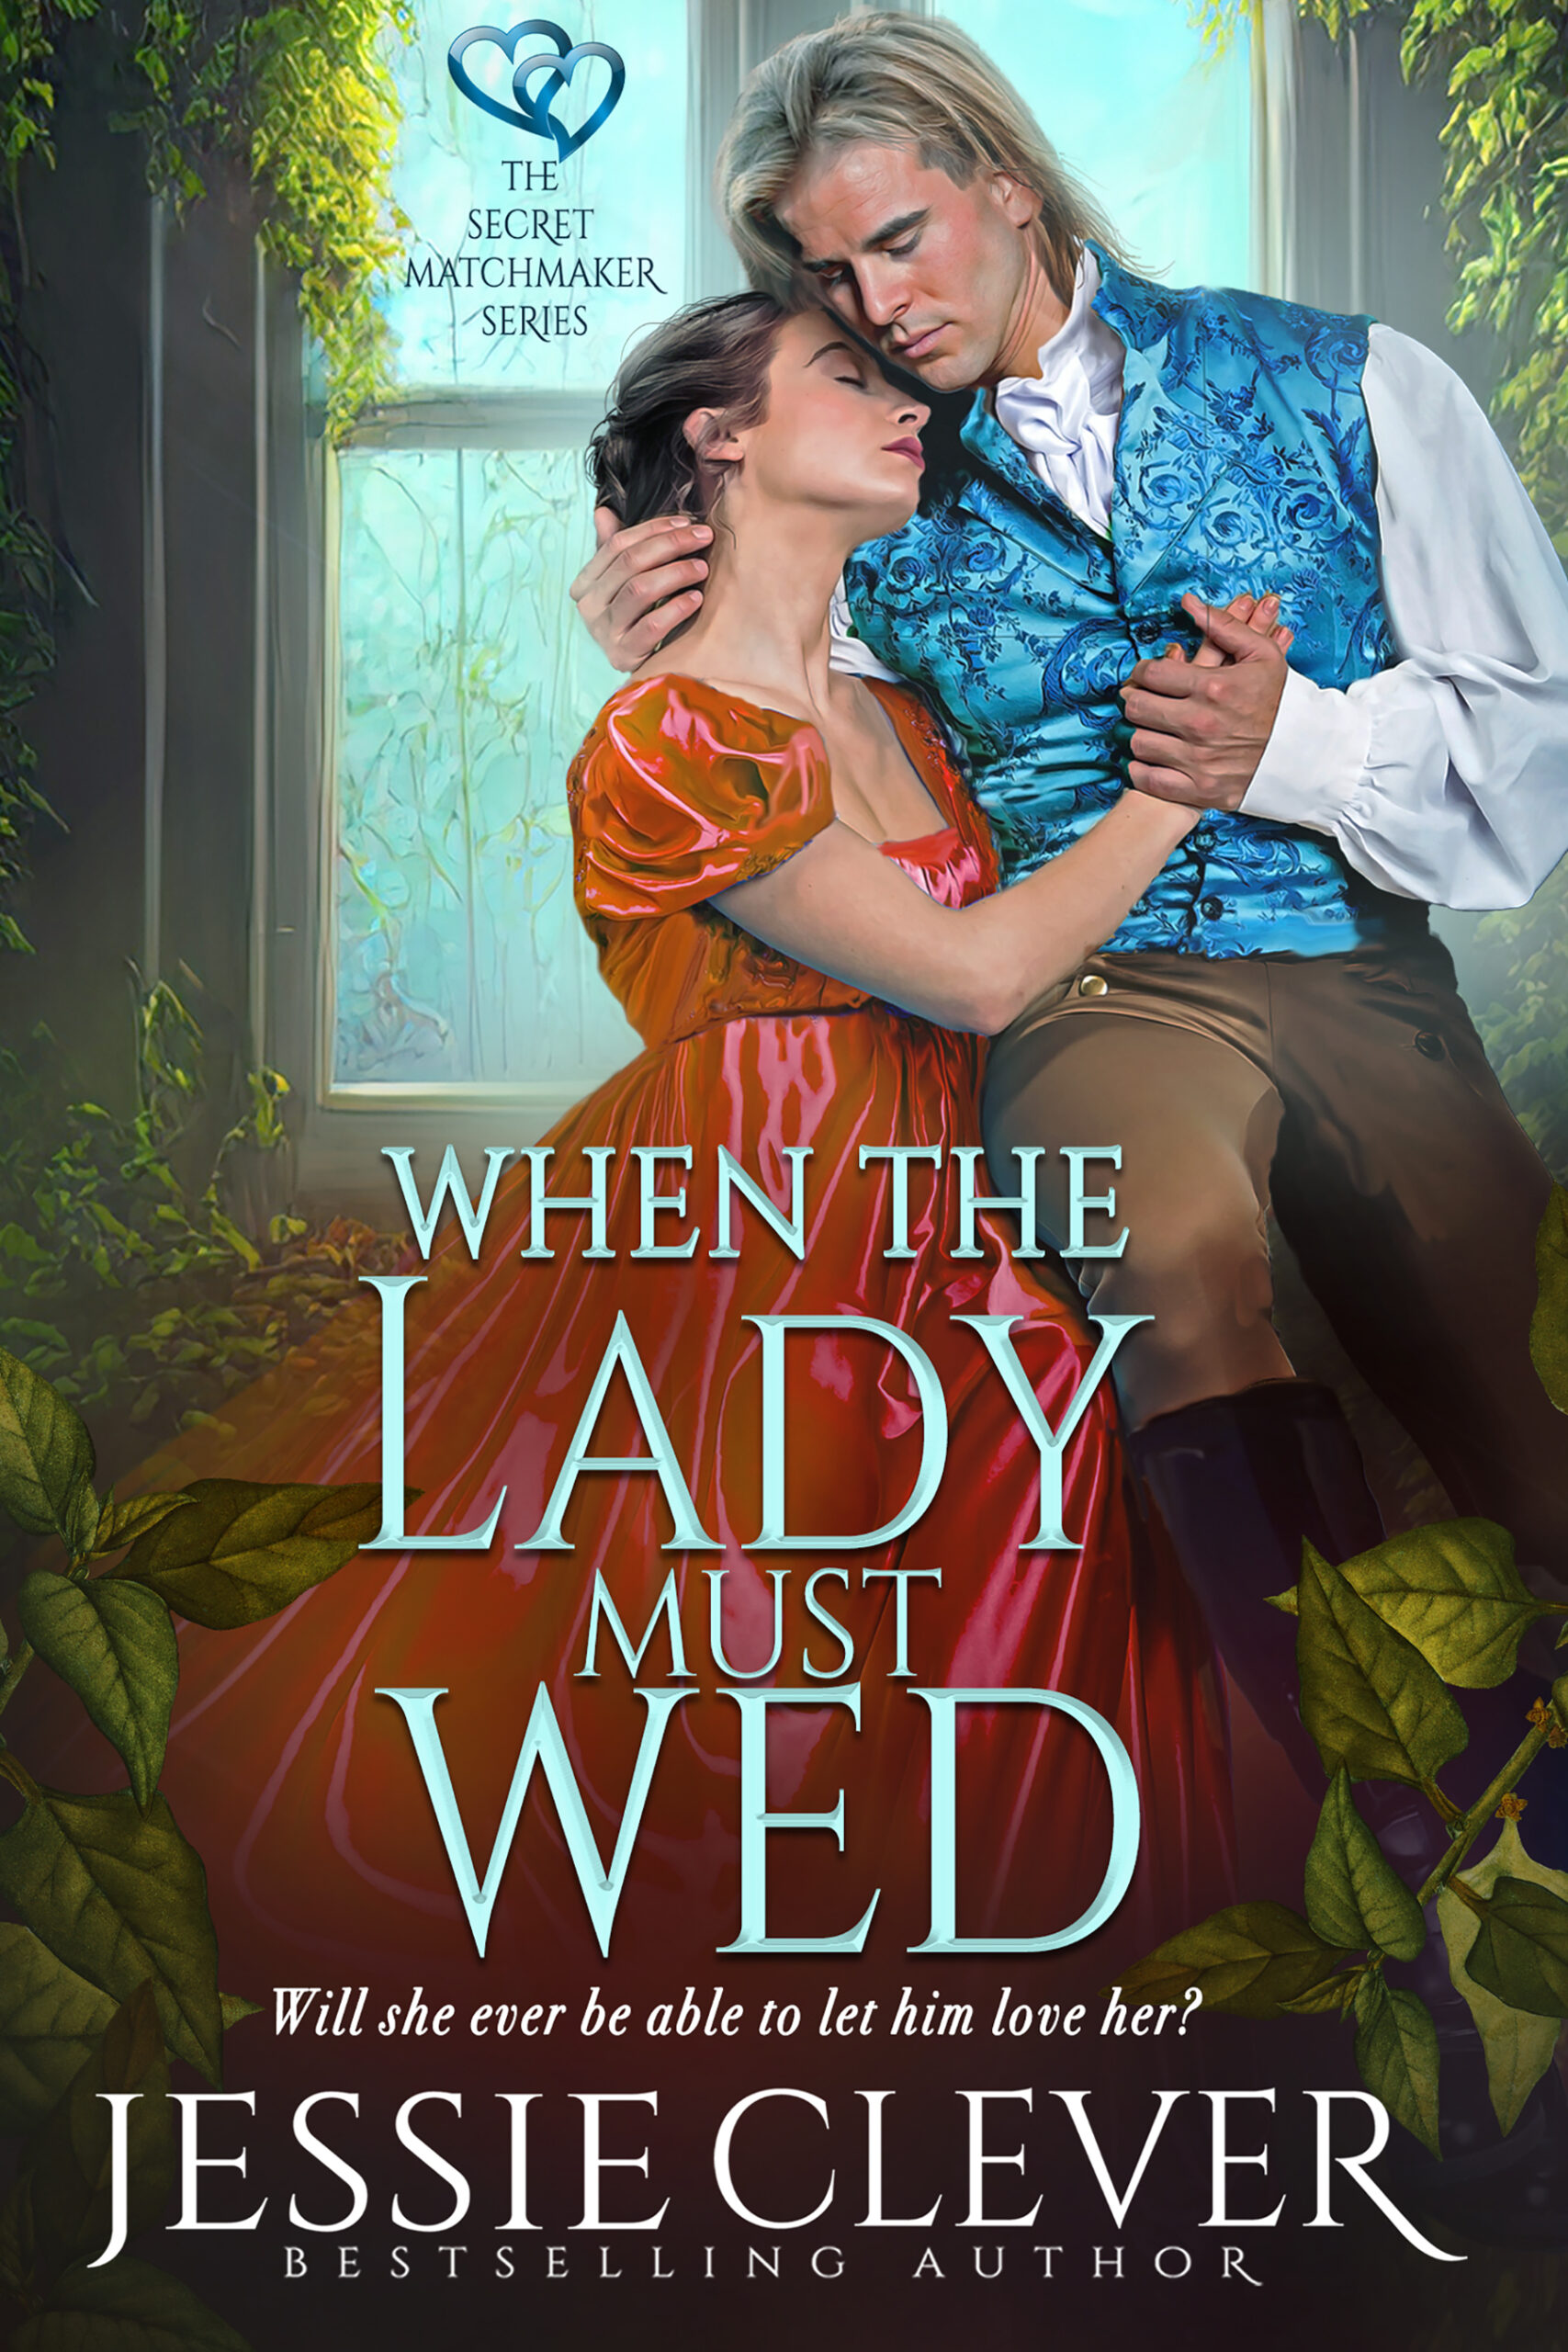 Now Available for Pre-Order: When the Lady Must Wed